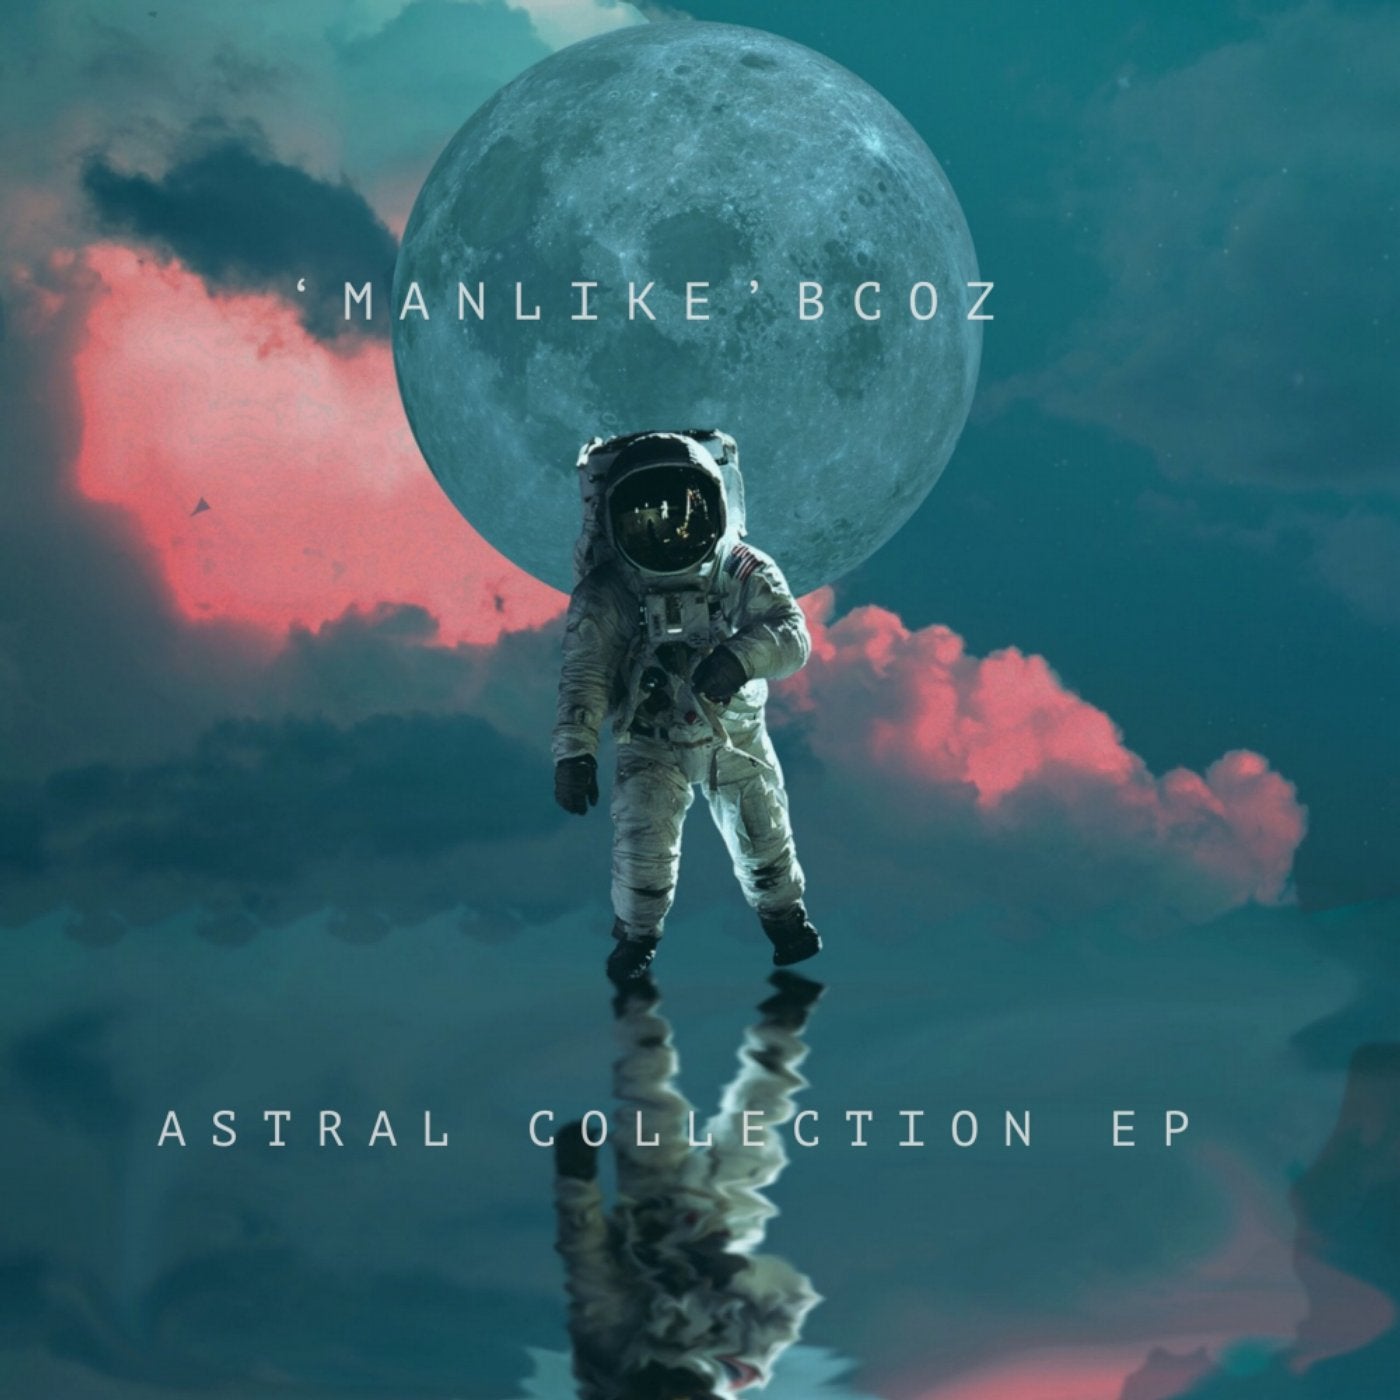 Astral Collection EP